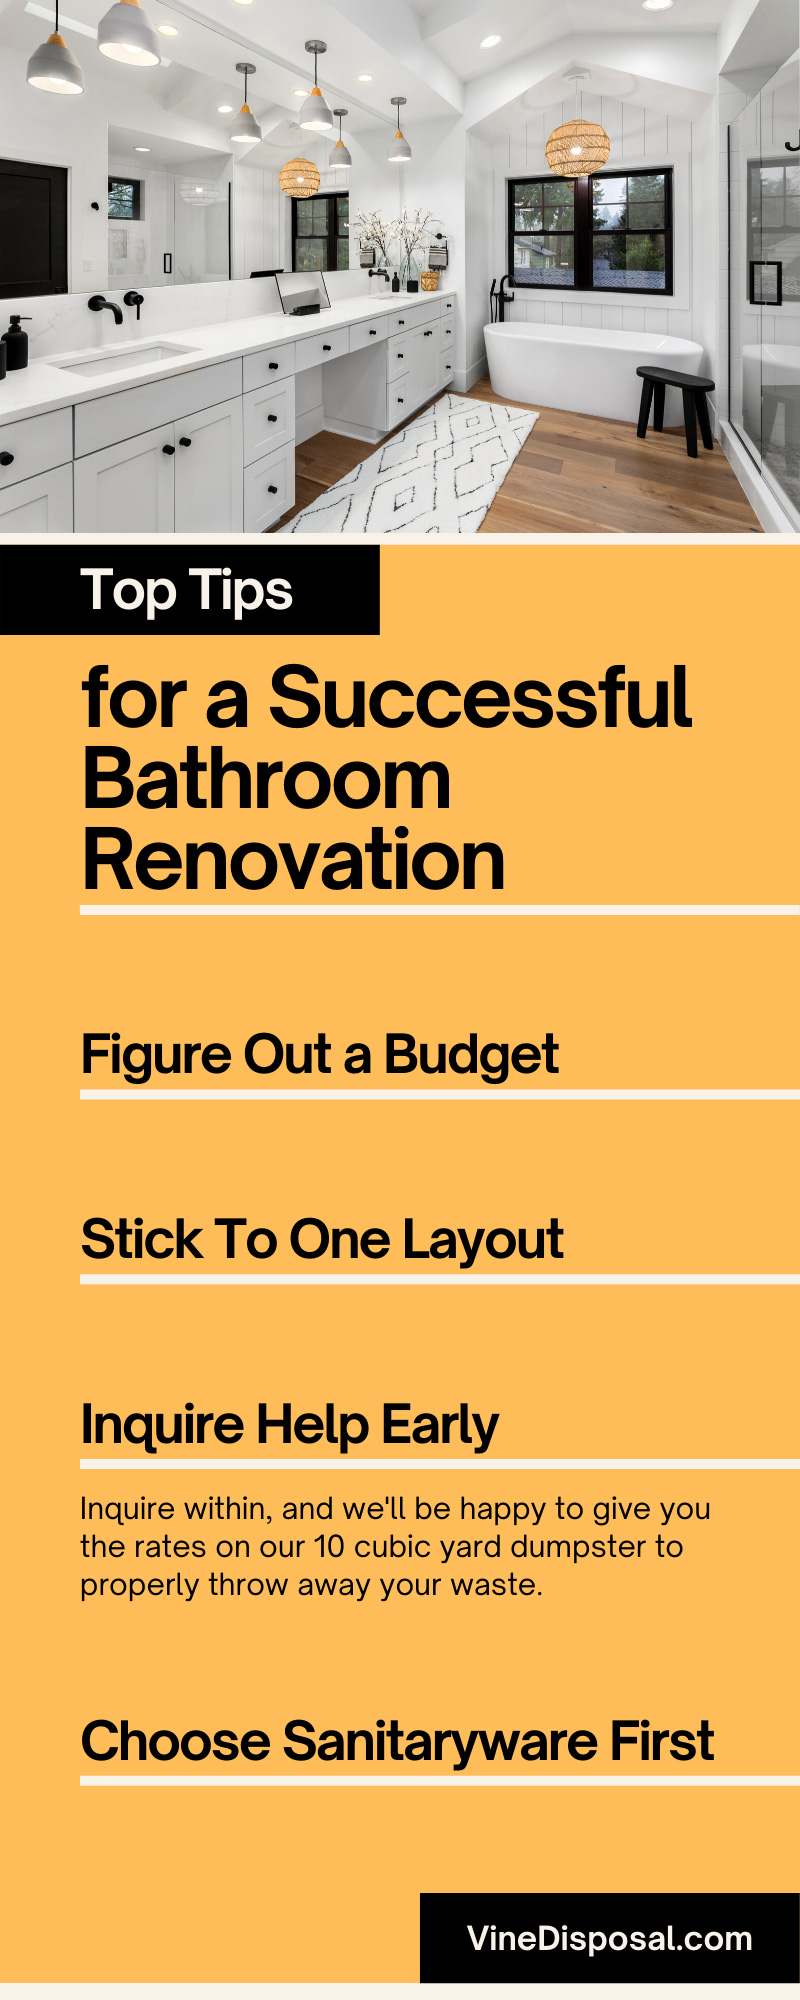 Top Tips for a Successful Bathroom Renovation